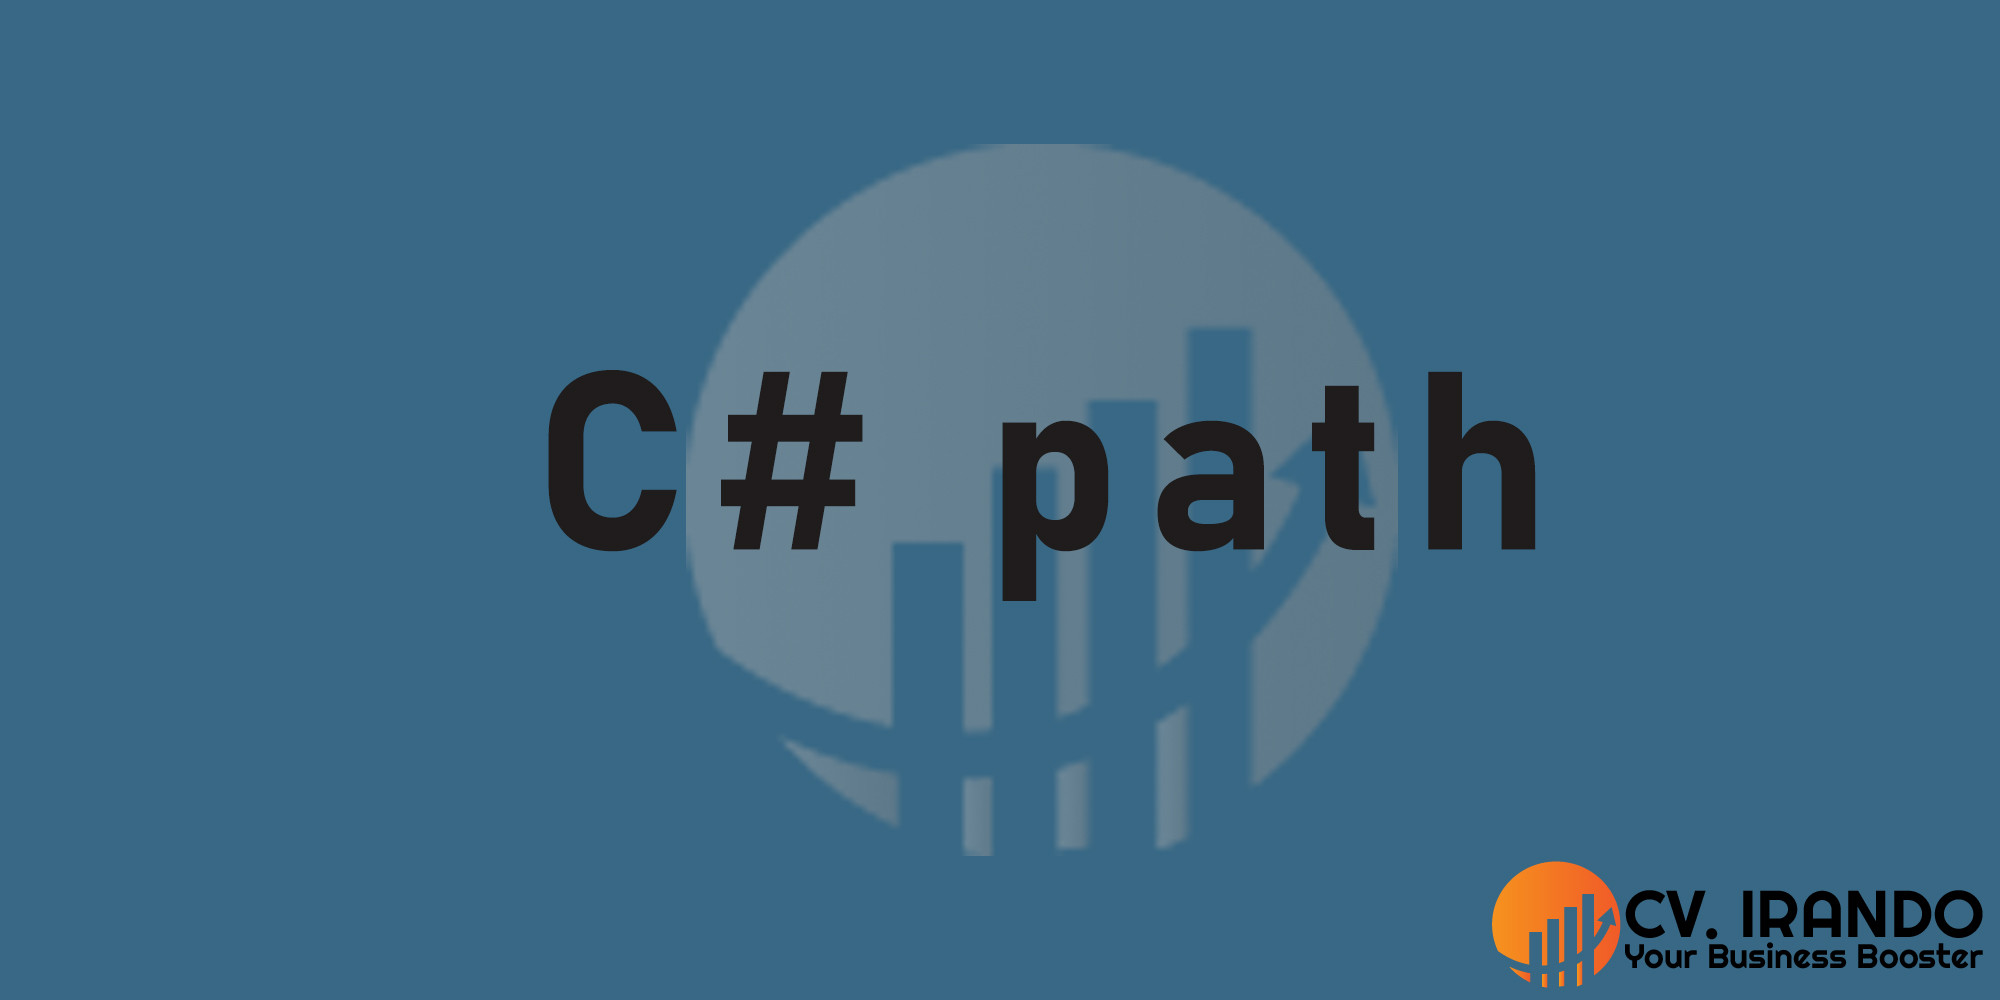 Learn about path in C#